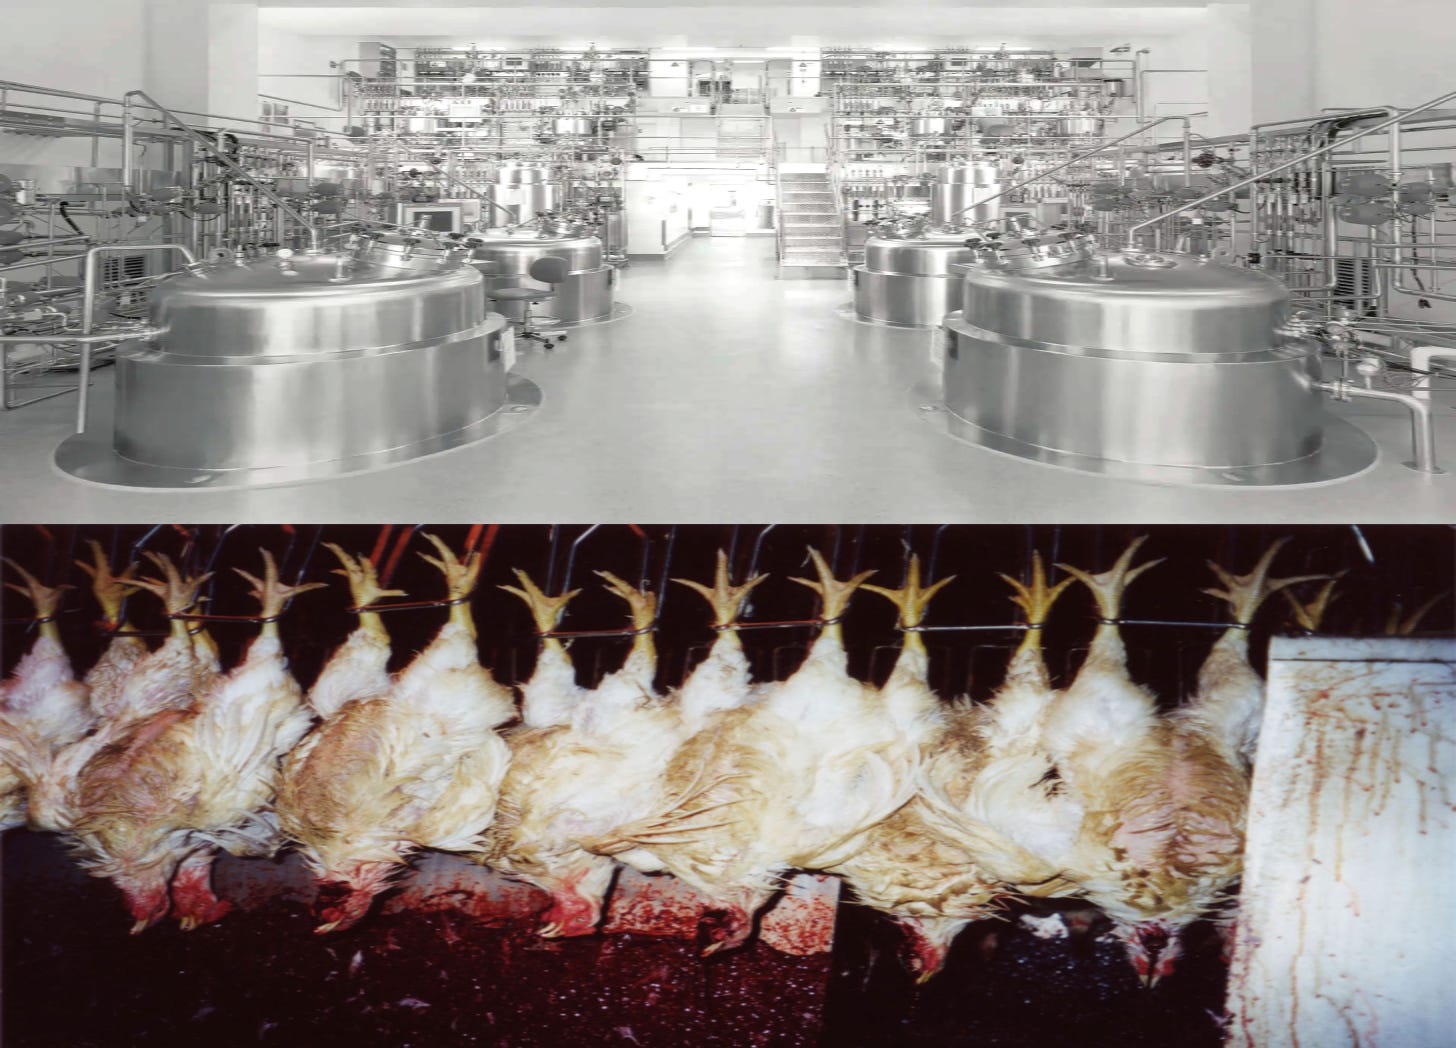 Two images comparing what cell-based chicken meat production looks like (clean) vs. slaughter-based chicken meat production looks like (bloody).